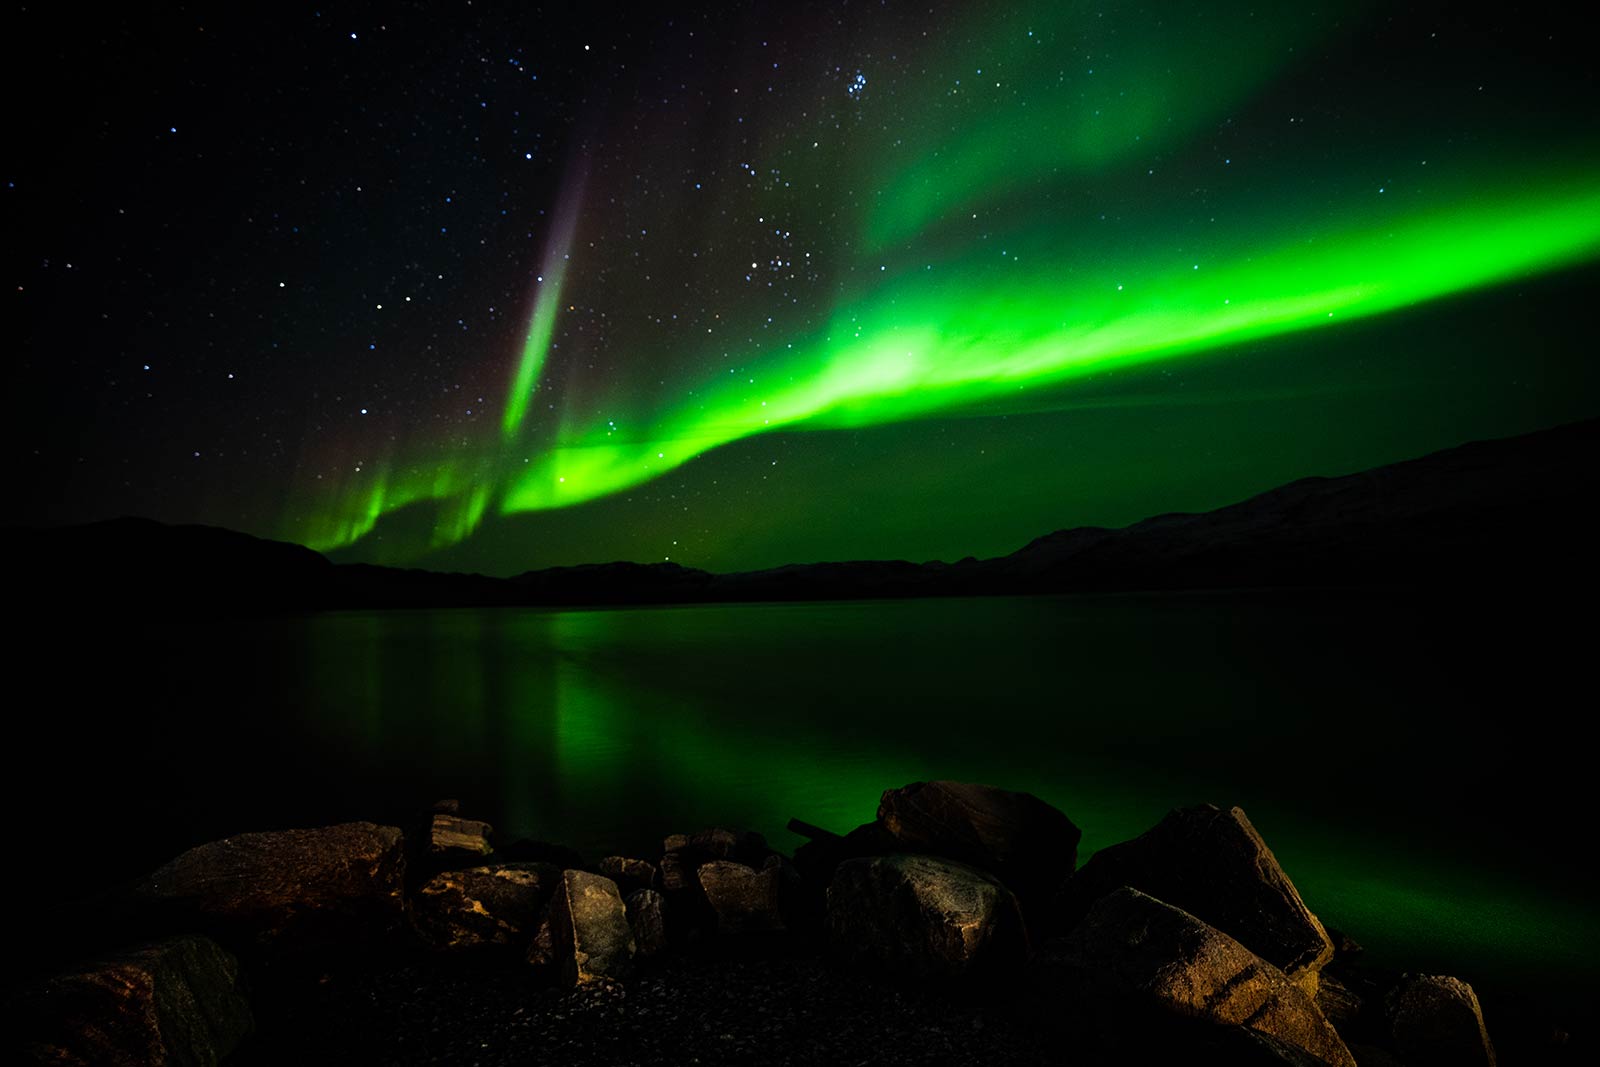 The Northern Lights in Kangerlussuaq, Greenland. Glacier, ice sheets & The Northern Lights